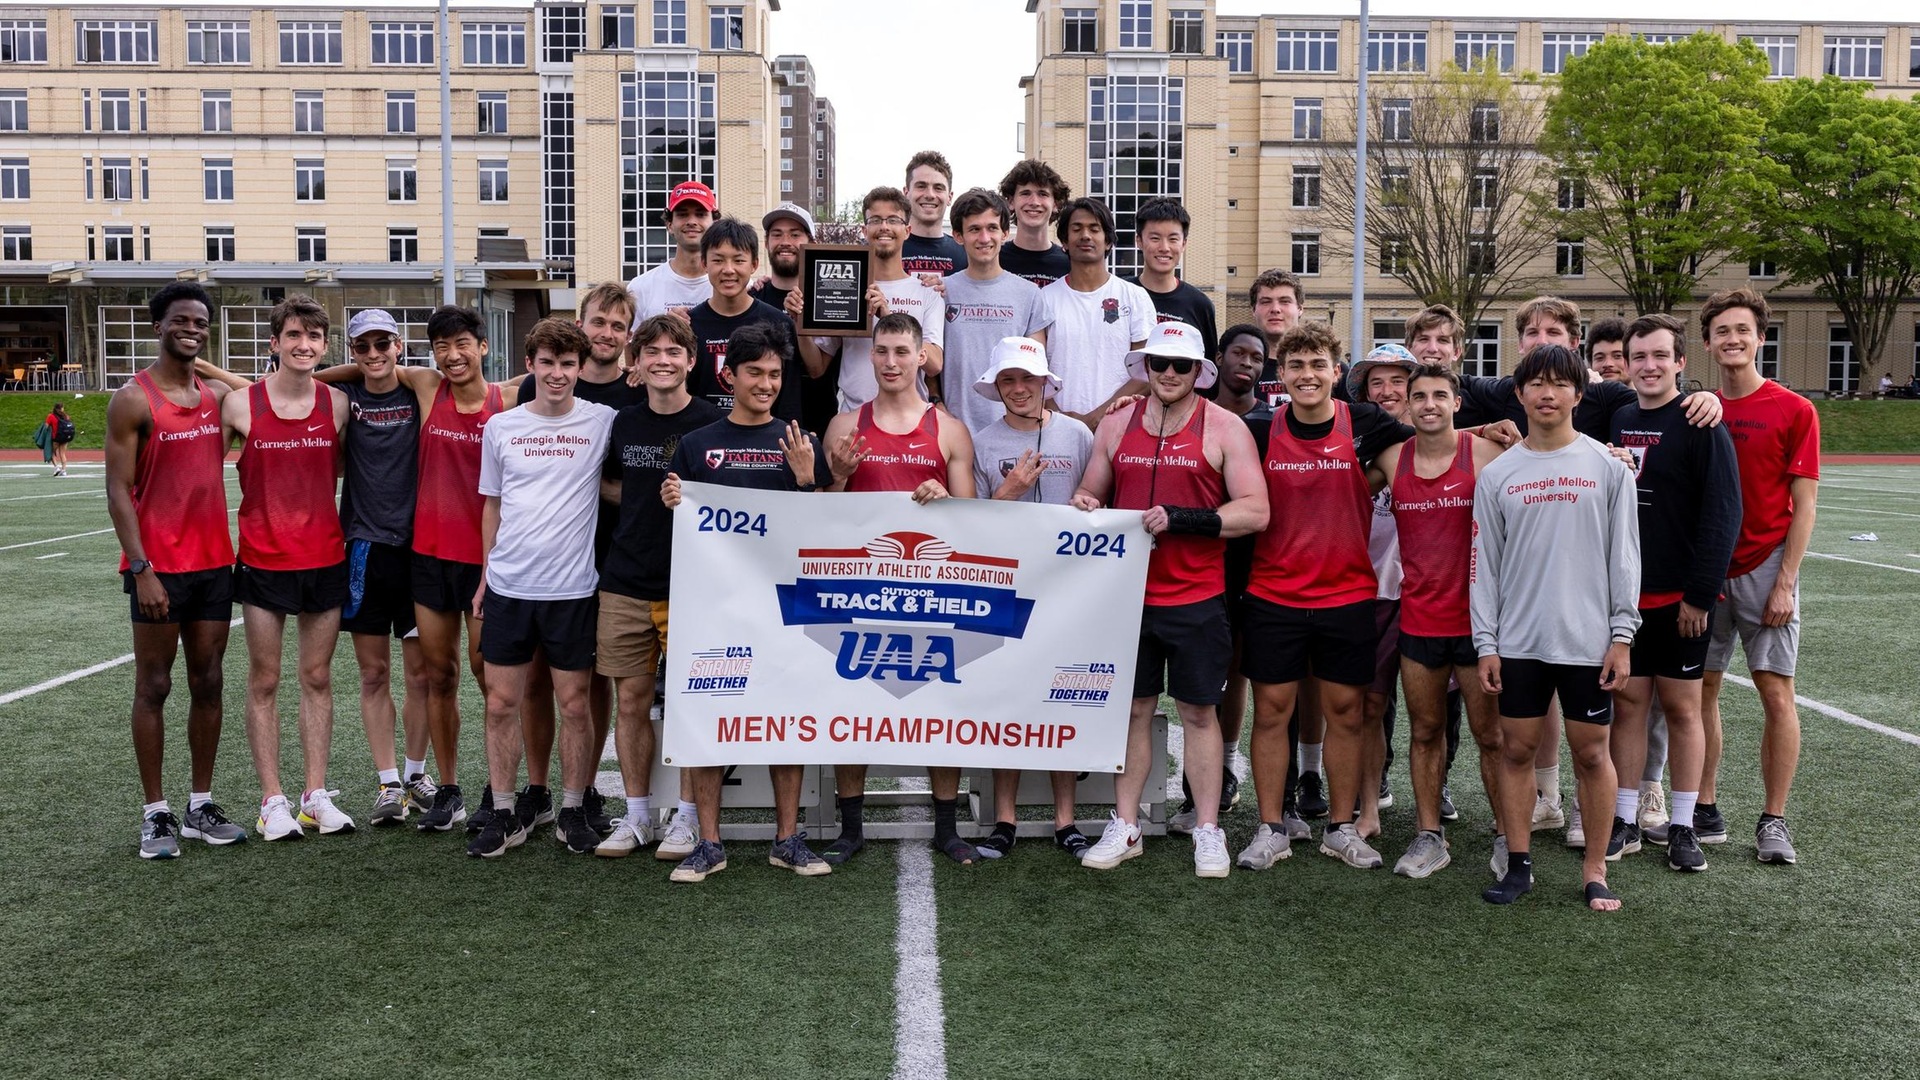 team photo of men's track team holding a championship banner